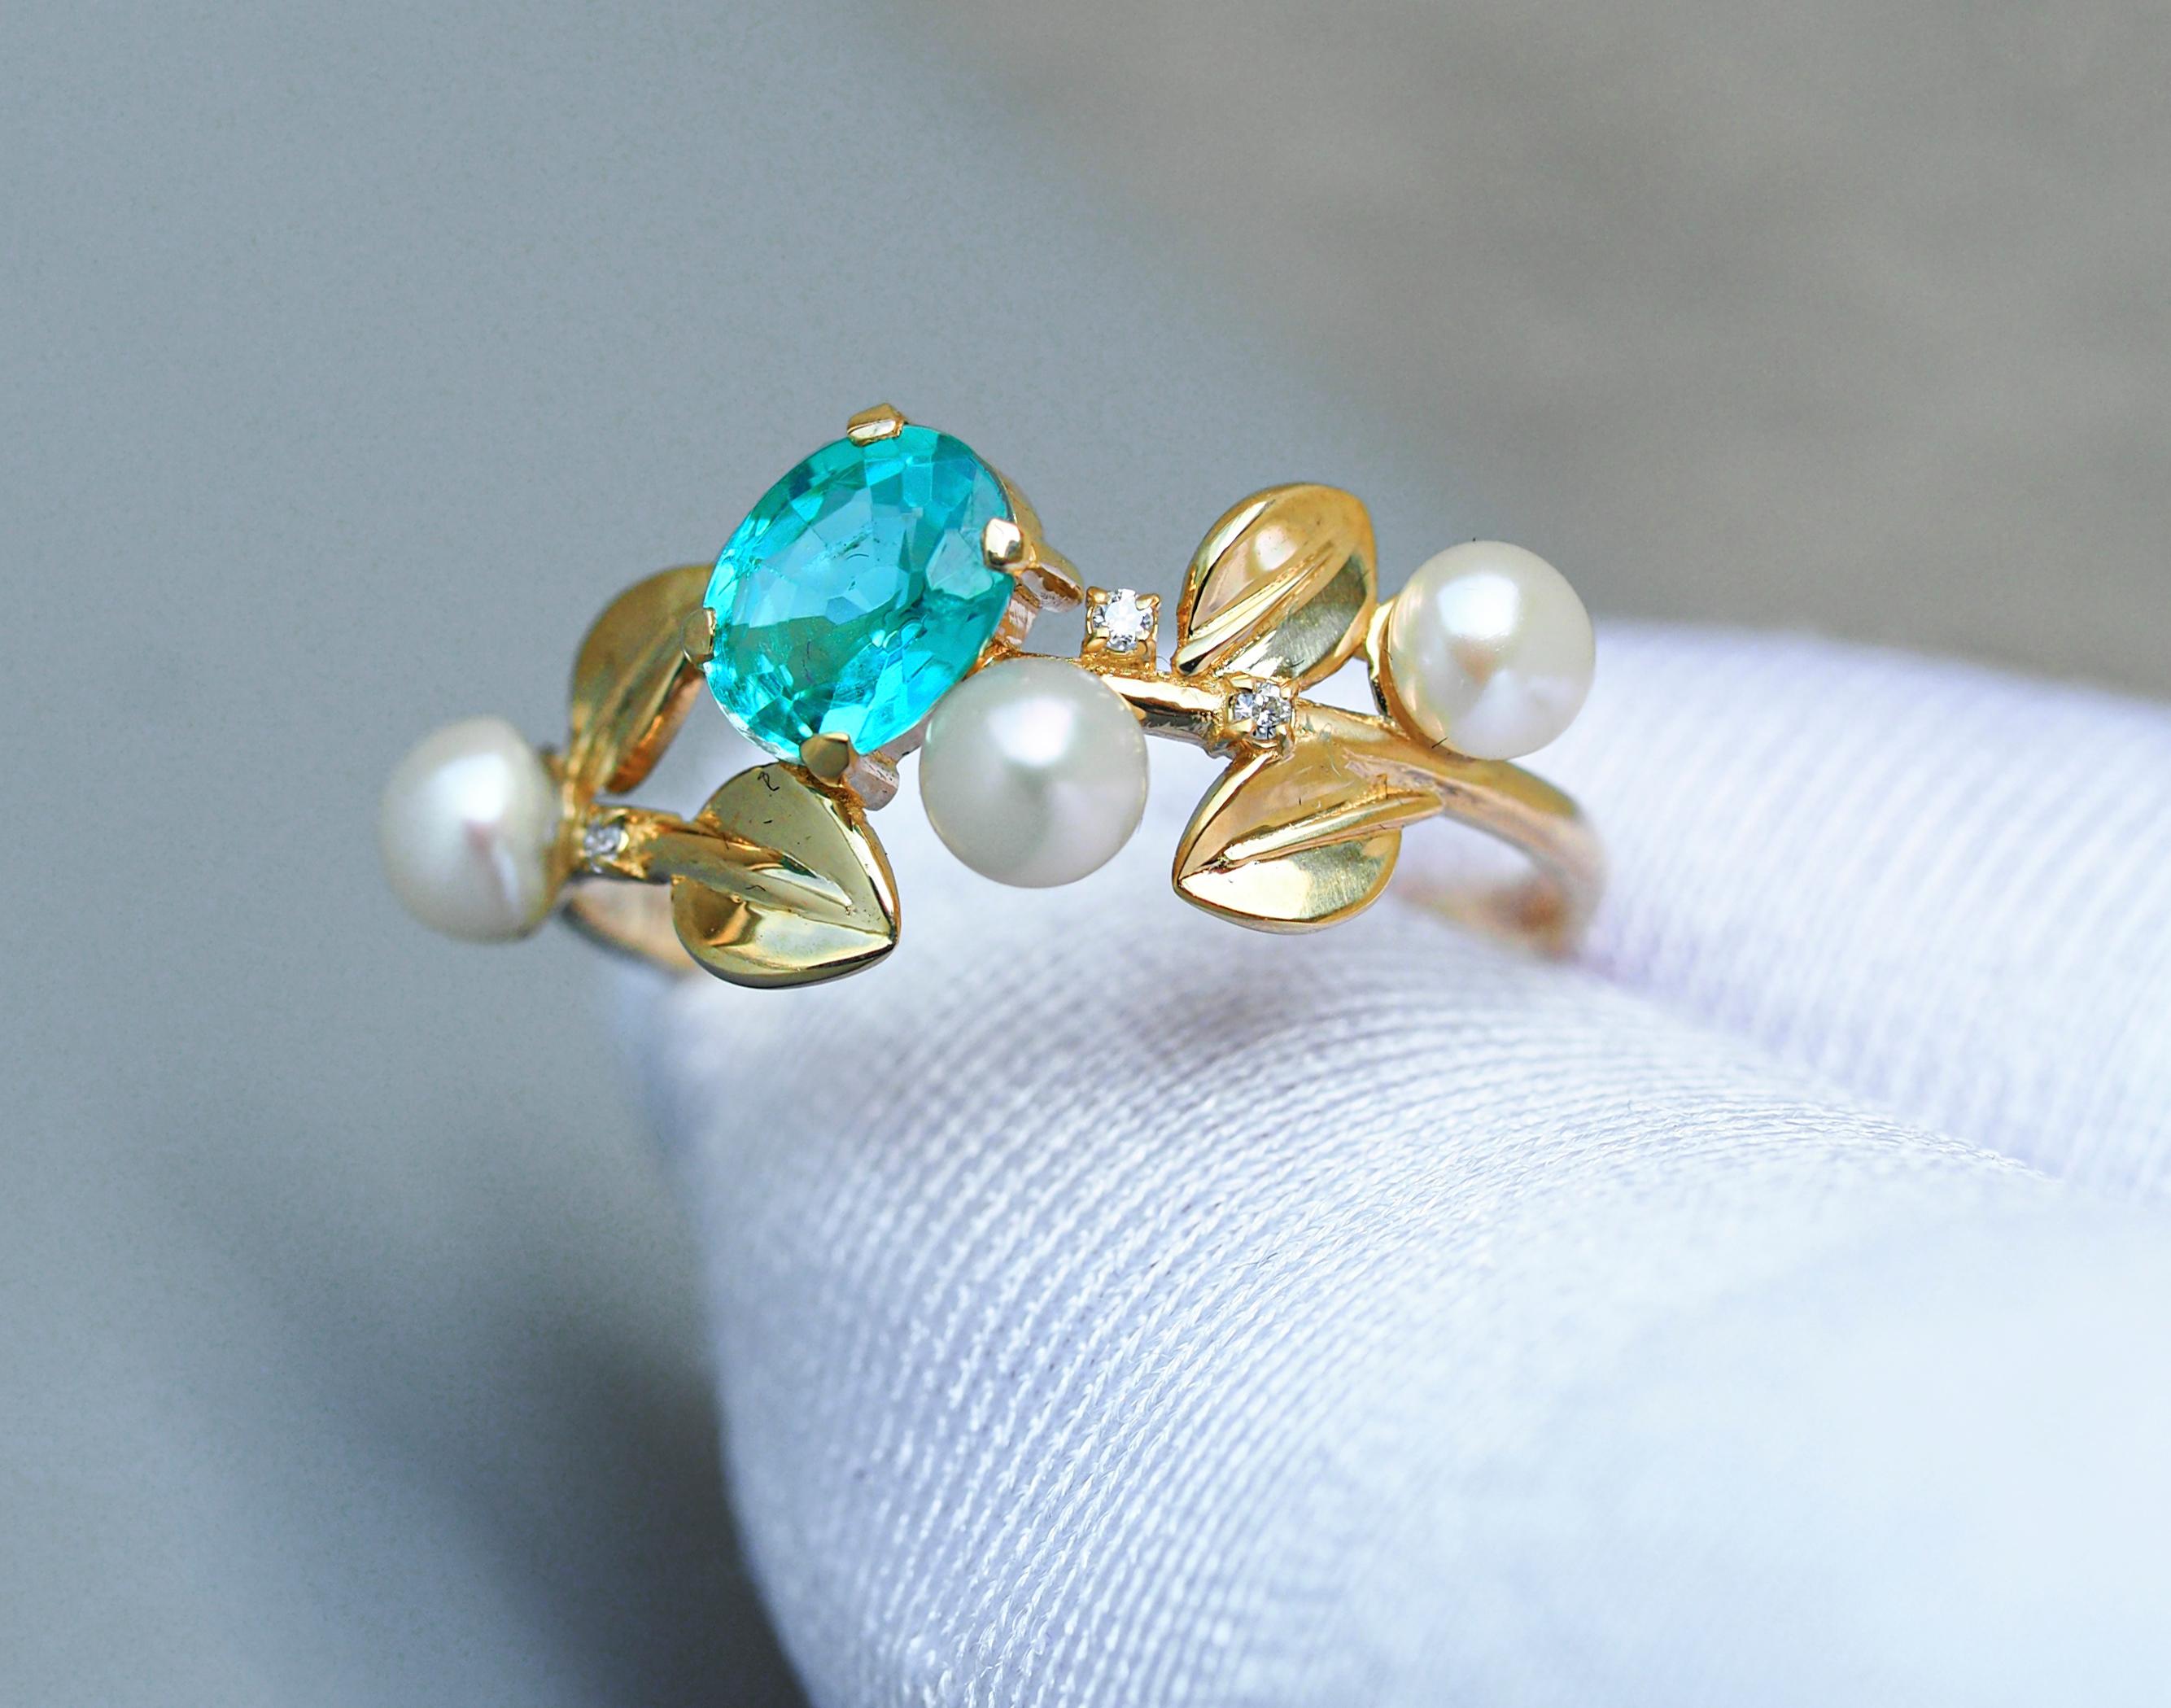 For Sale:  14k Gold Floral Ring with Oval Apatite, Diamonds and Pearls 9